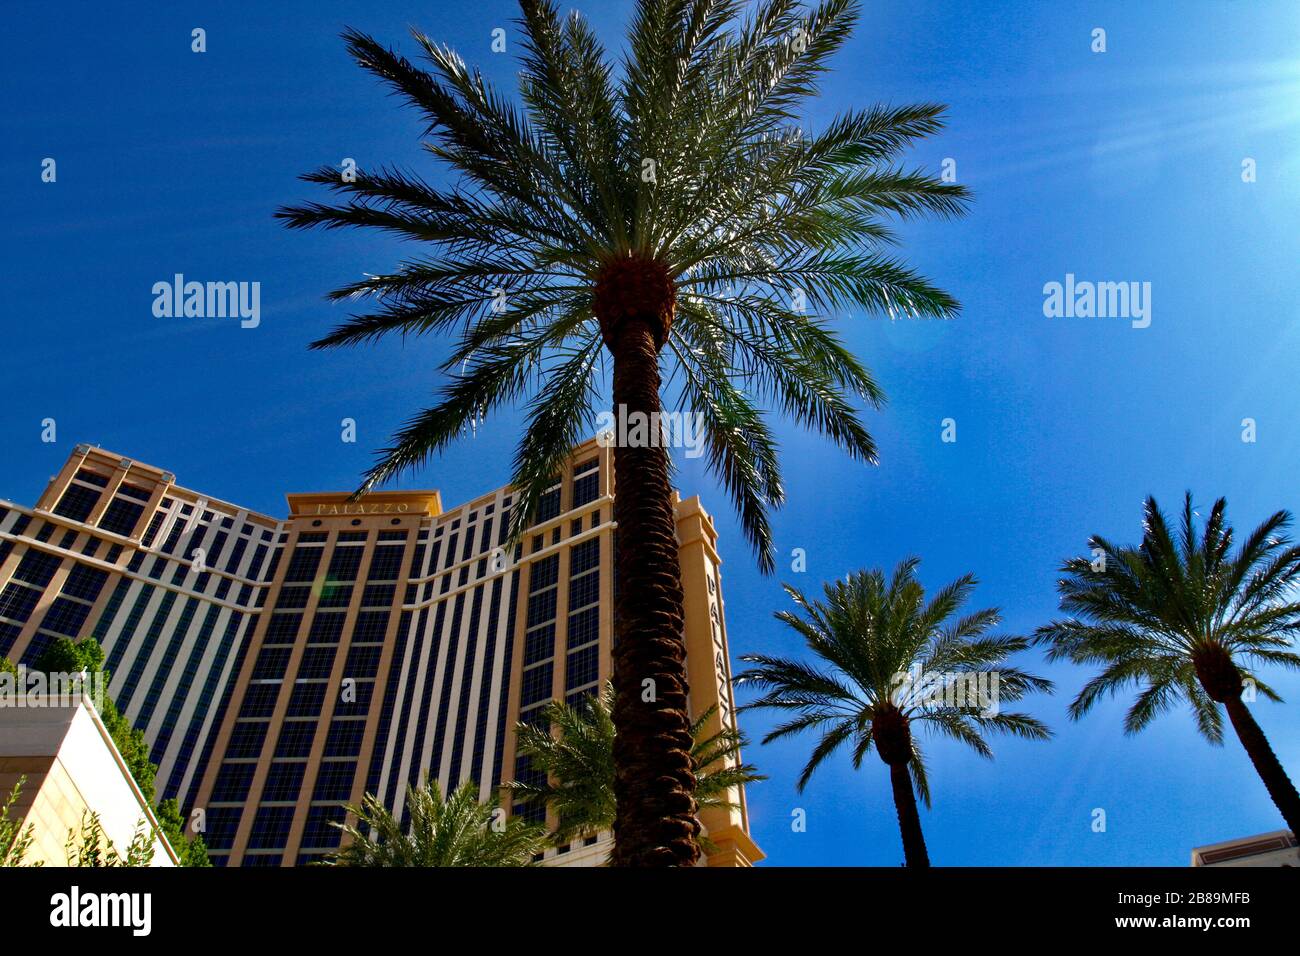 palm tress in this beautiful city Stock Photo